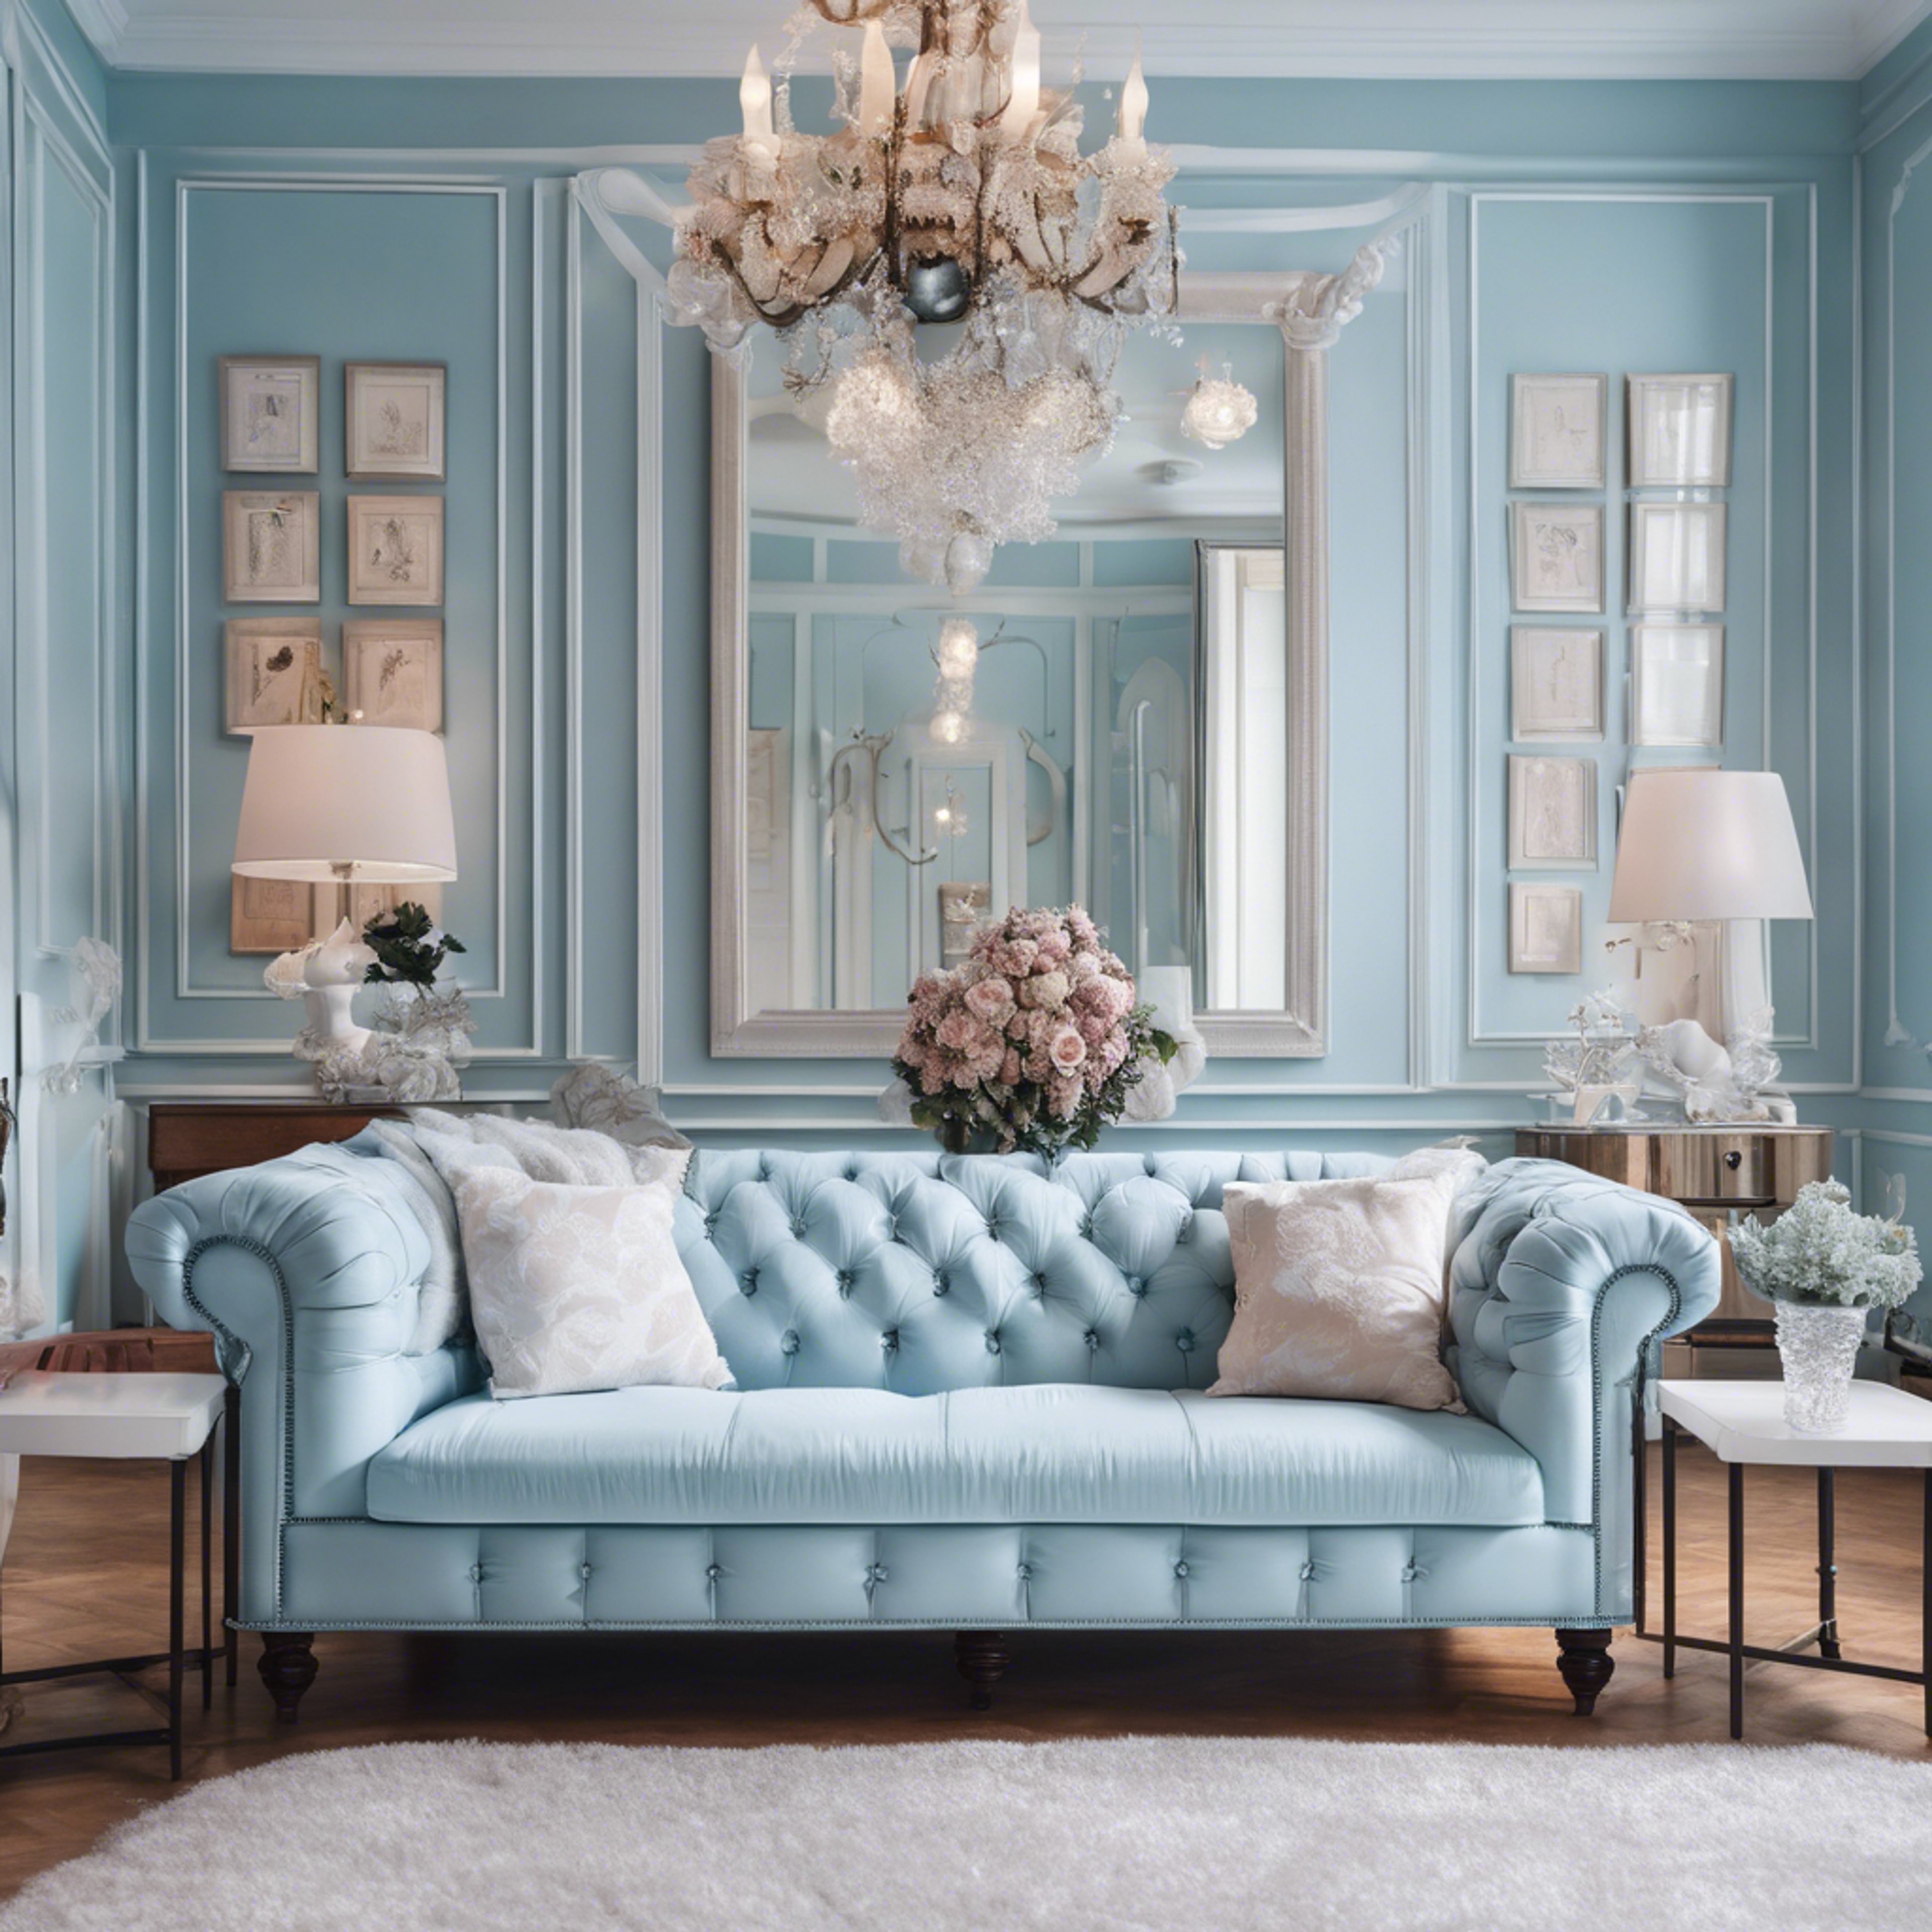 A preppy styled room with pastel blue wallpaper, Chesterfield sofa, and white French style furniture.” Wallpaper[3904fac215ba4f1eaa62]